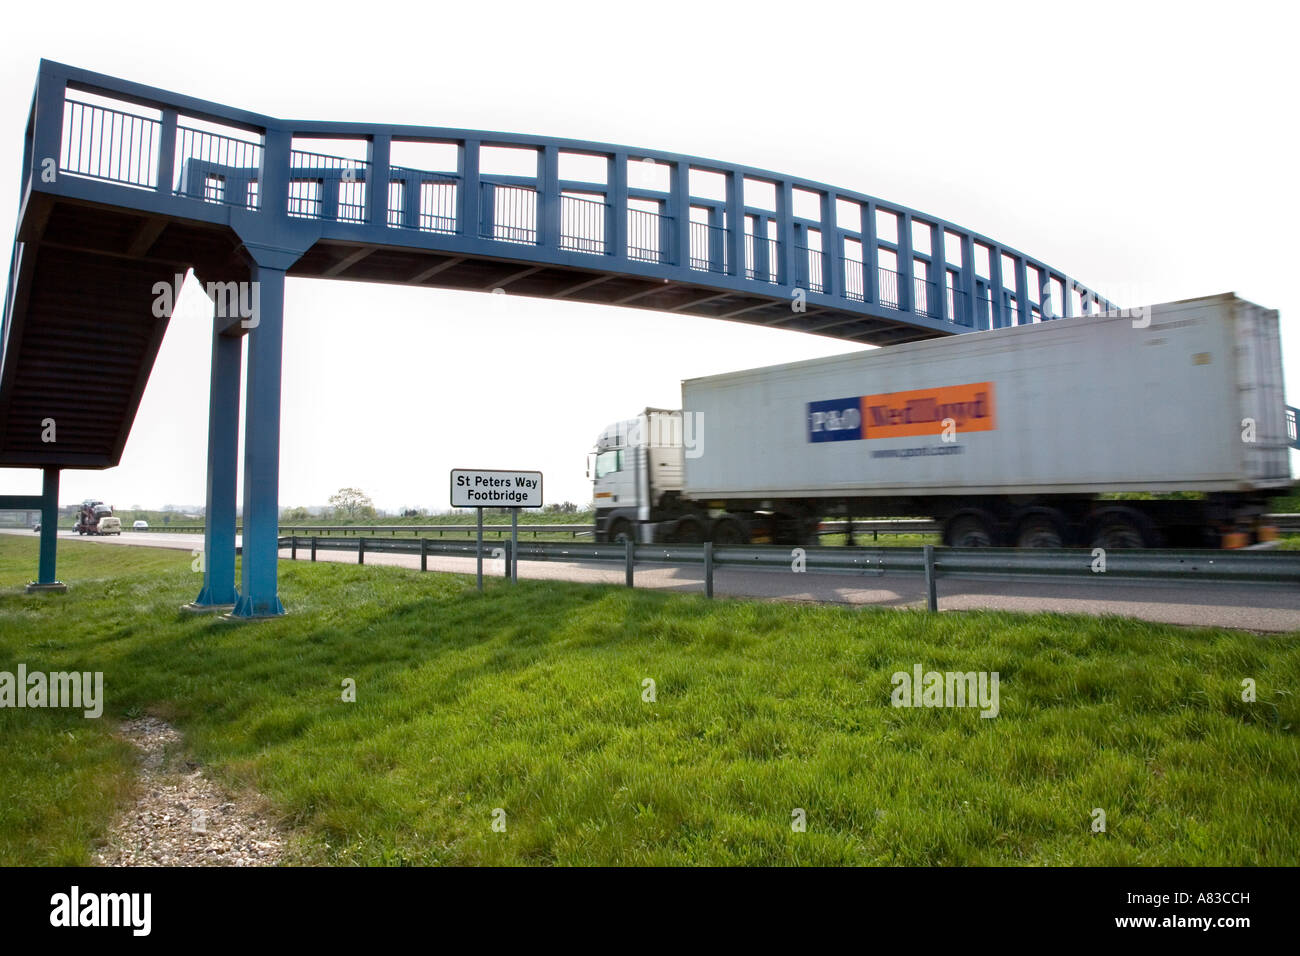 THE A130 ROAD VIEWED OVER ST PETERS WAY FOOTBRIDGE NEAR CHELMSFORD, ESSEX, ENGLAND. Stock Photo